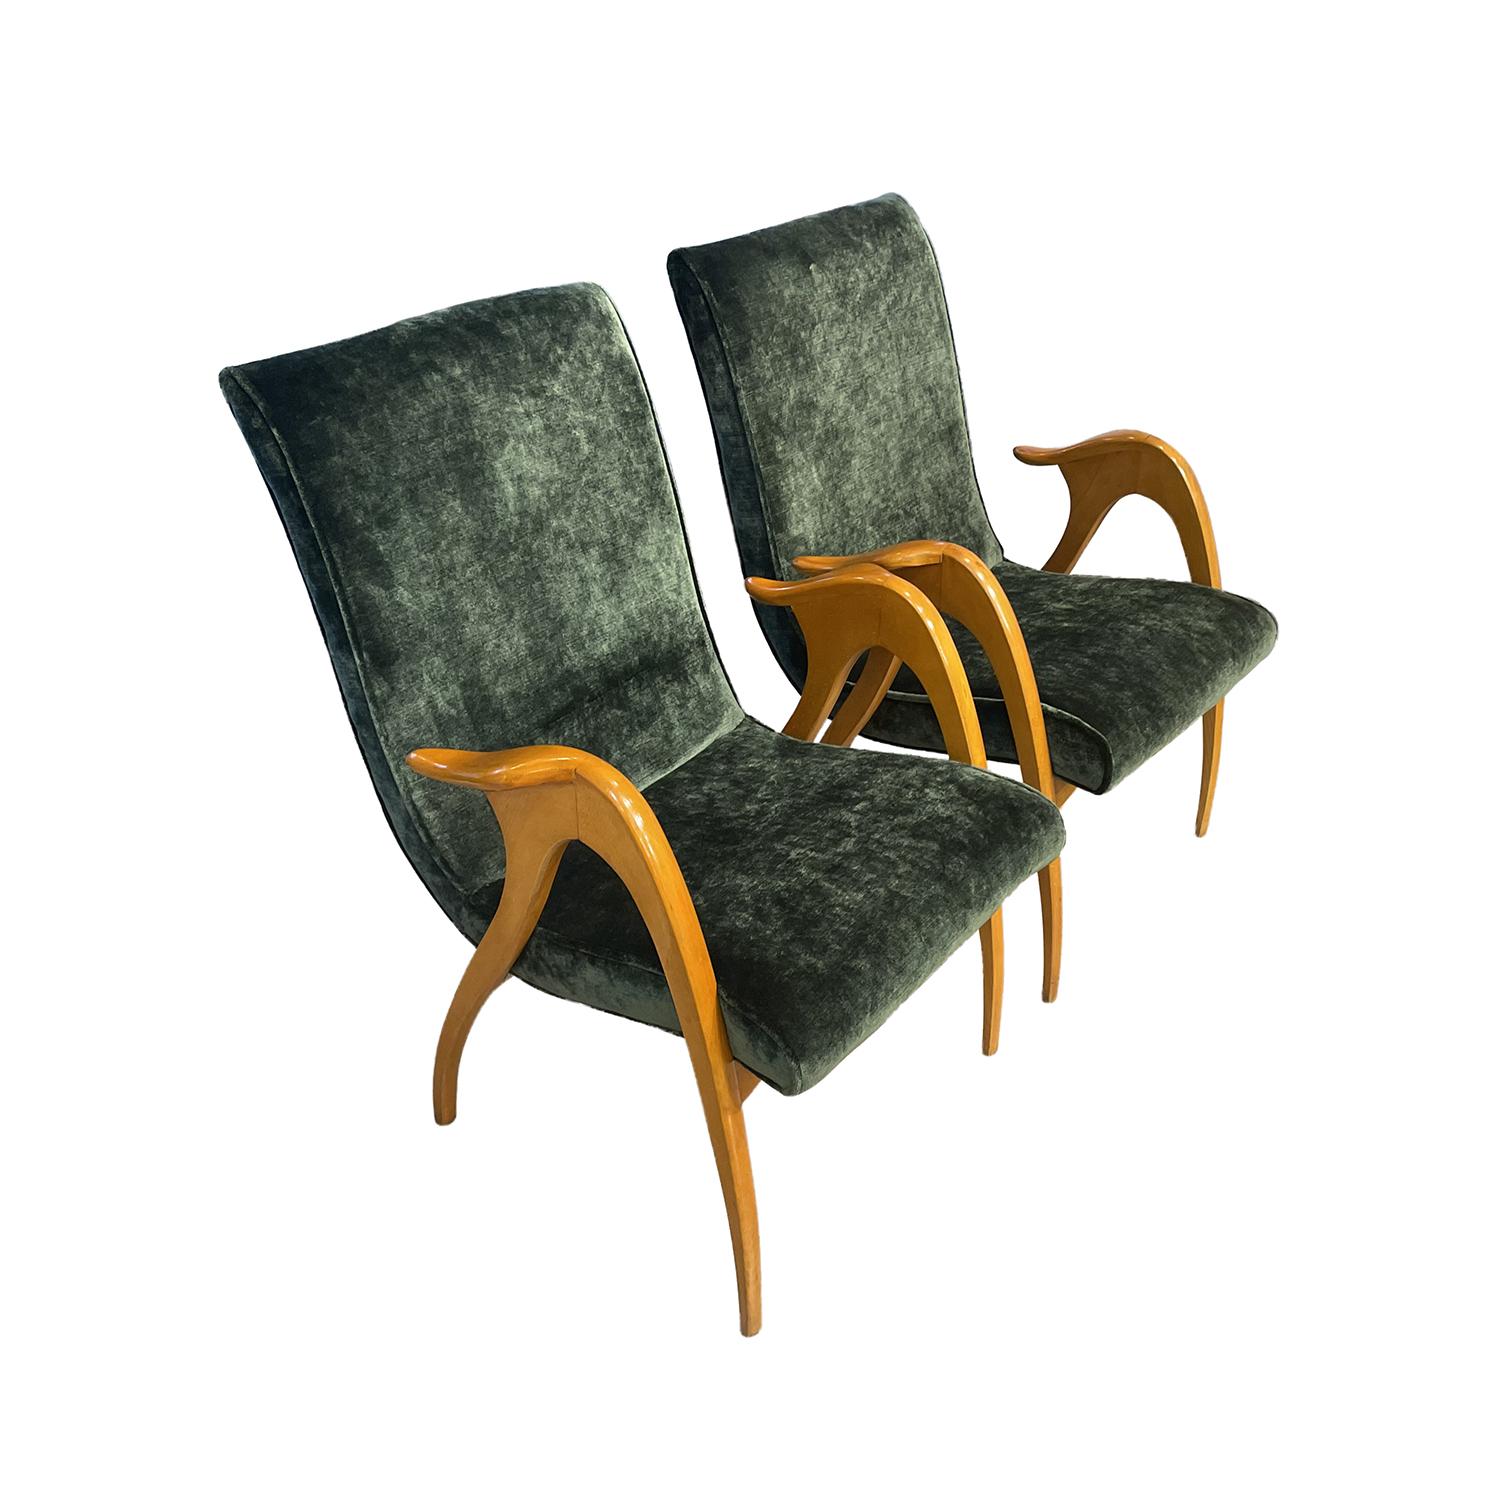 Hand-Carved 20th Century Green Italian Pair of Beechwood Lounge Chairs by Malatesta & Masson For Sale